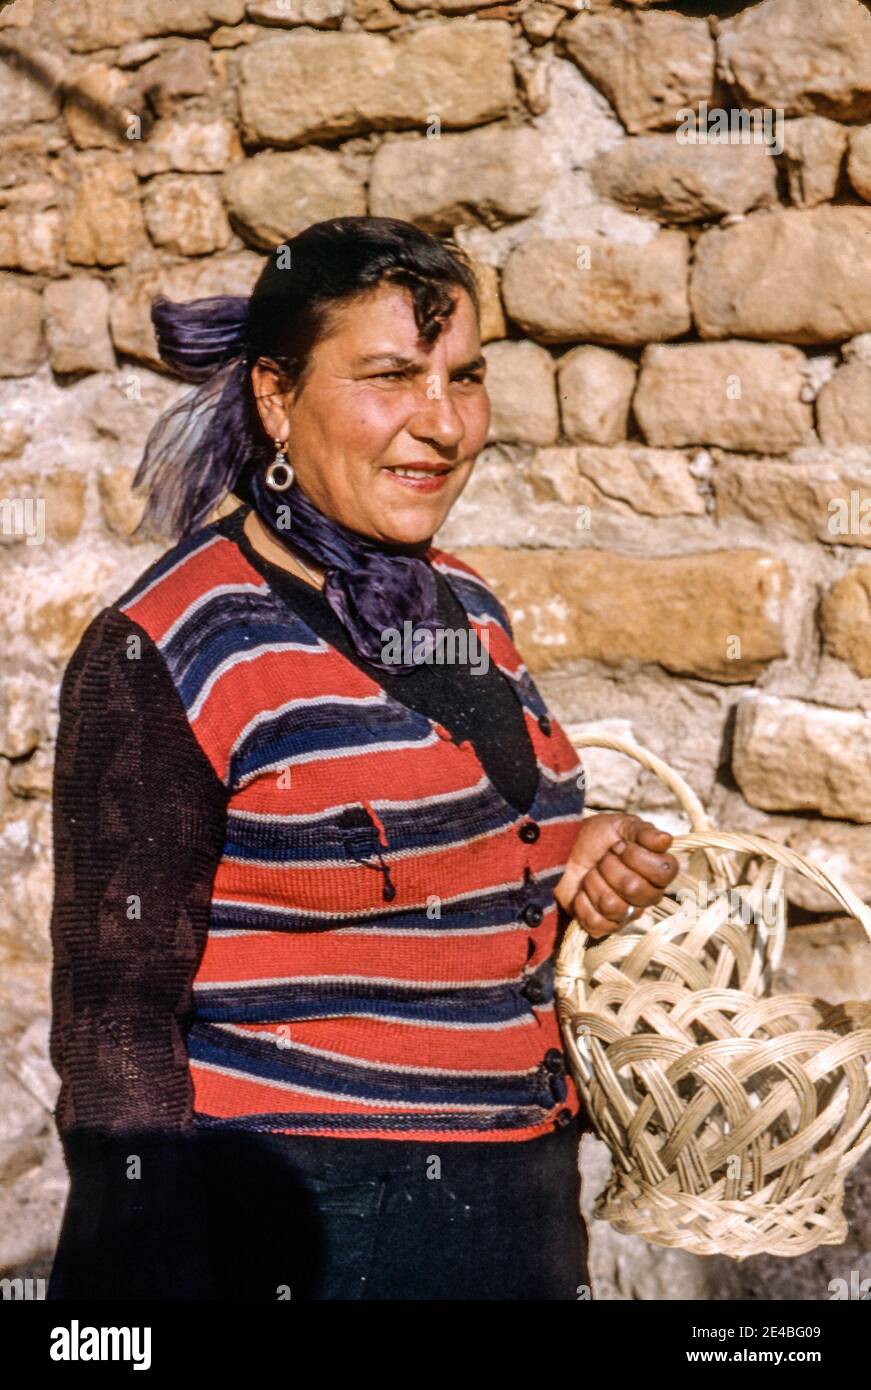 Gypsy woman with baskets, La Roque-sur-Cèze, Gard, France, in the early  Sixties Stock Photo - Alamy